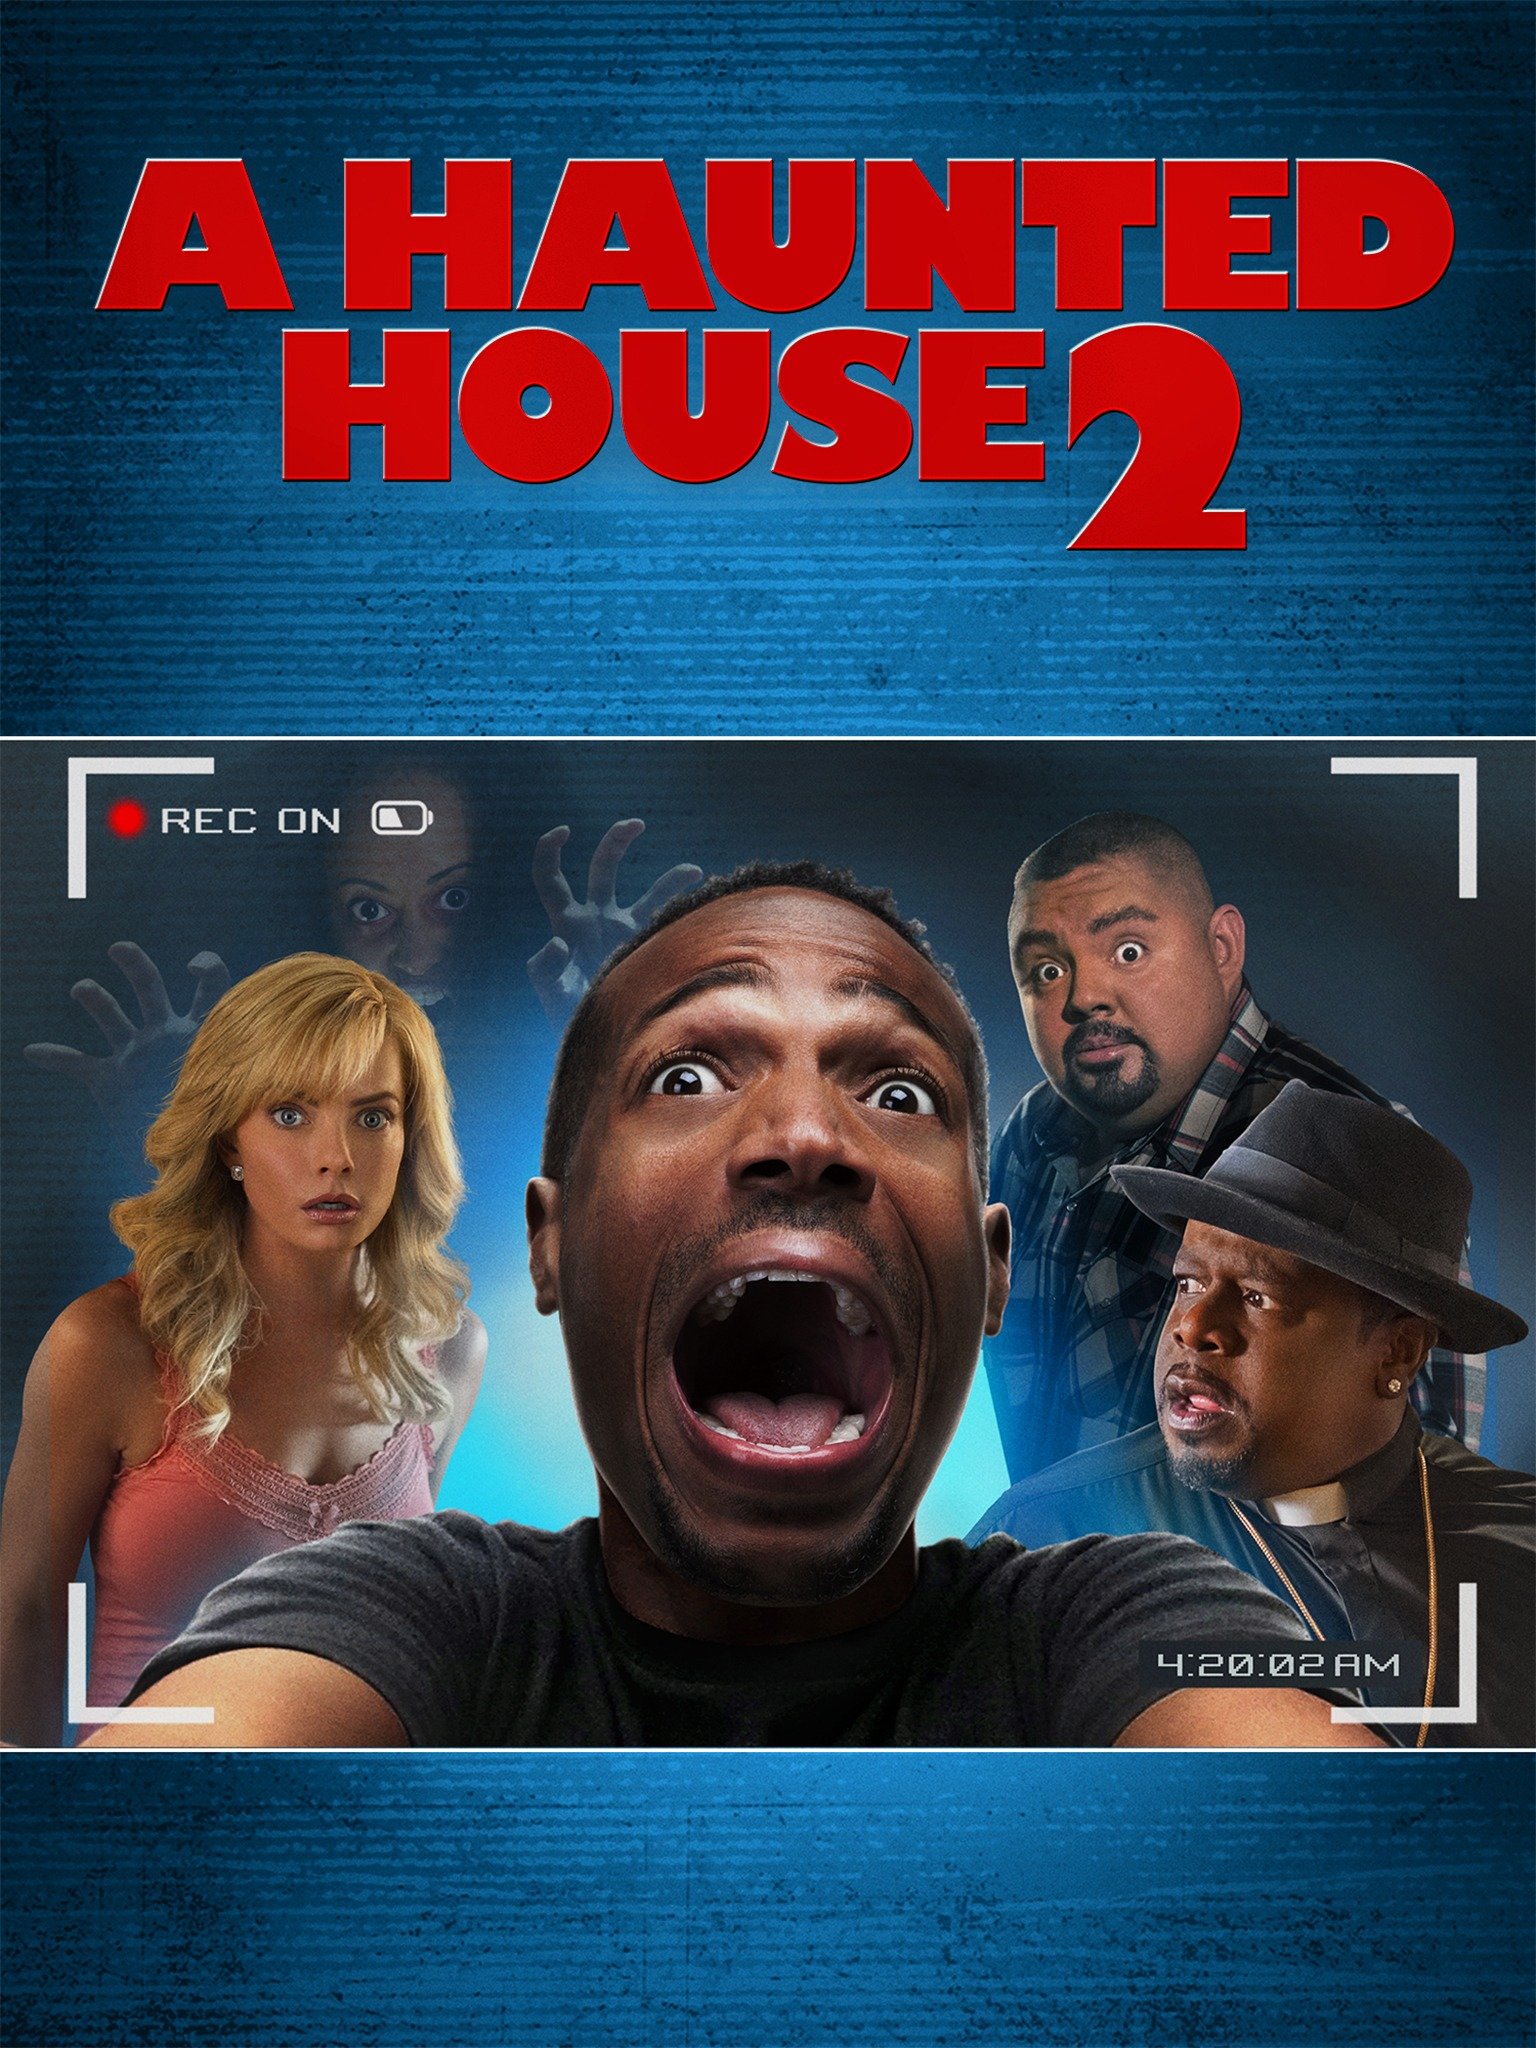 haunted house movie on hbo